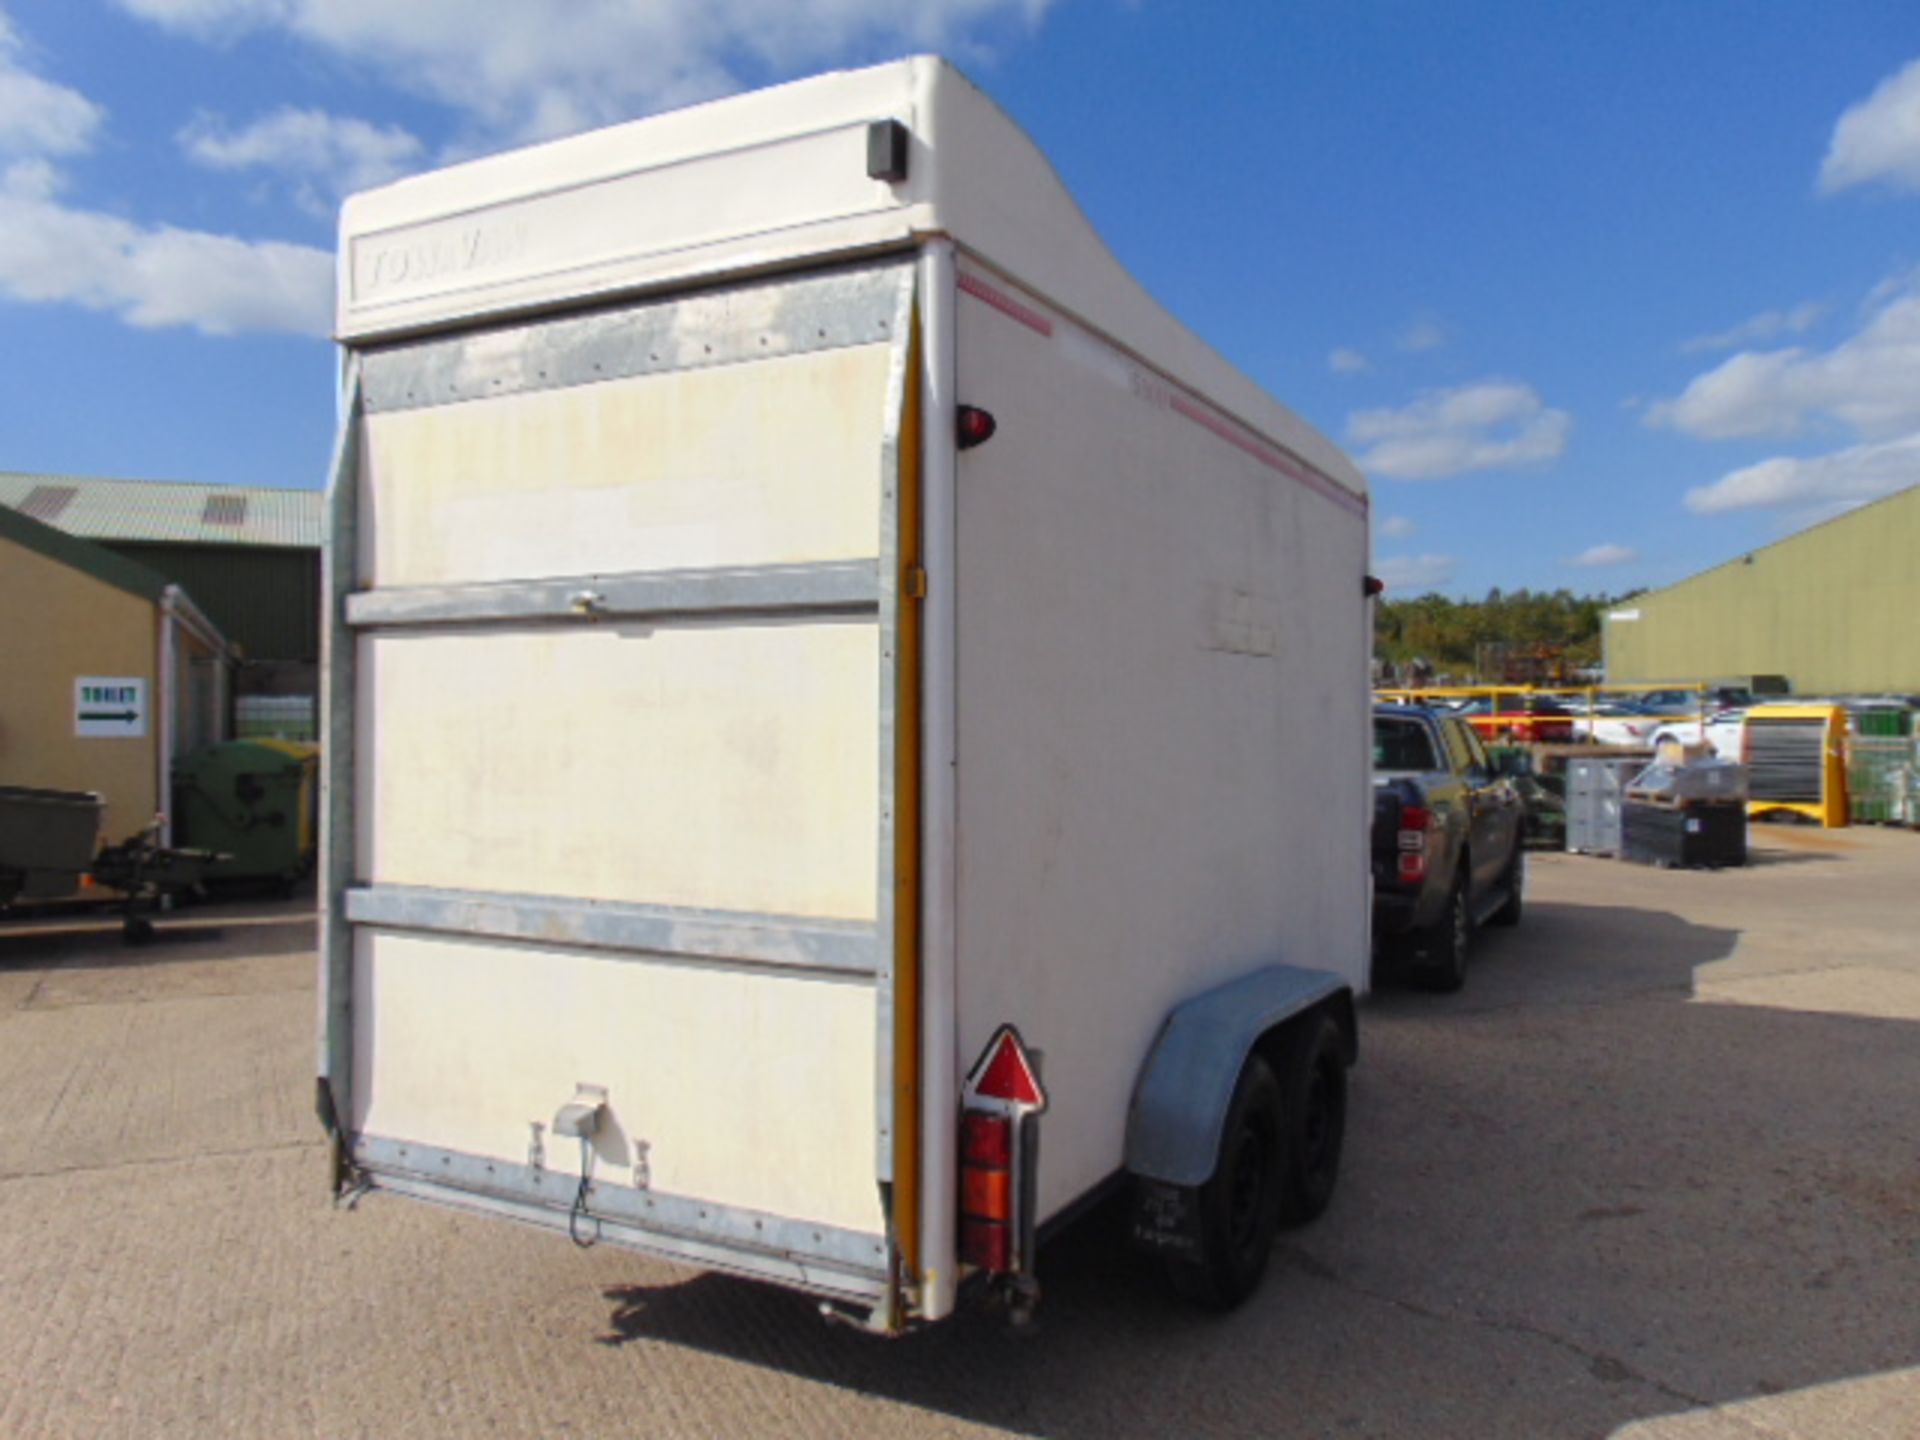 Twin Axle Tow A Van 580H Box Trailer c/w Dropdown Tailgate / Loading Ramp and Solar Panels - Image 4 of 25